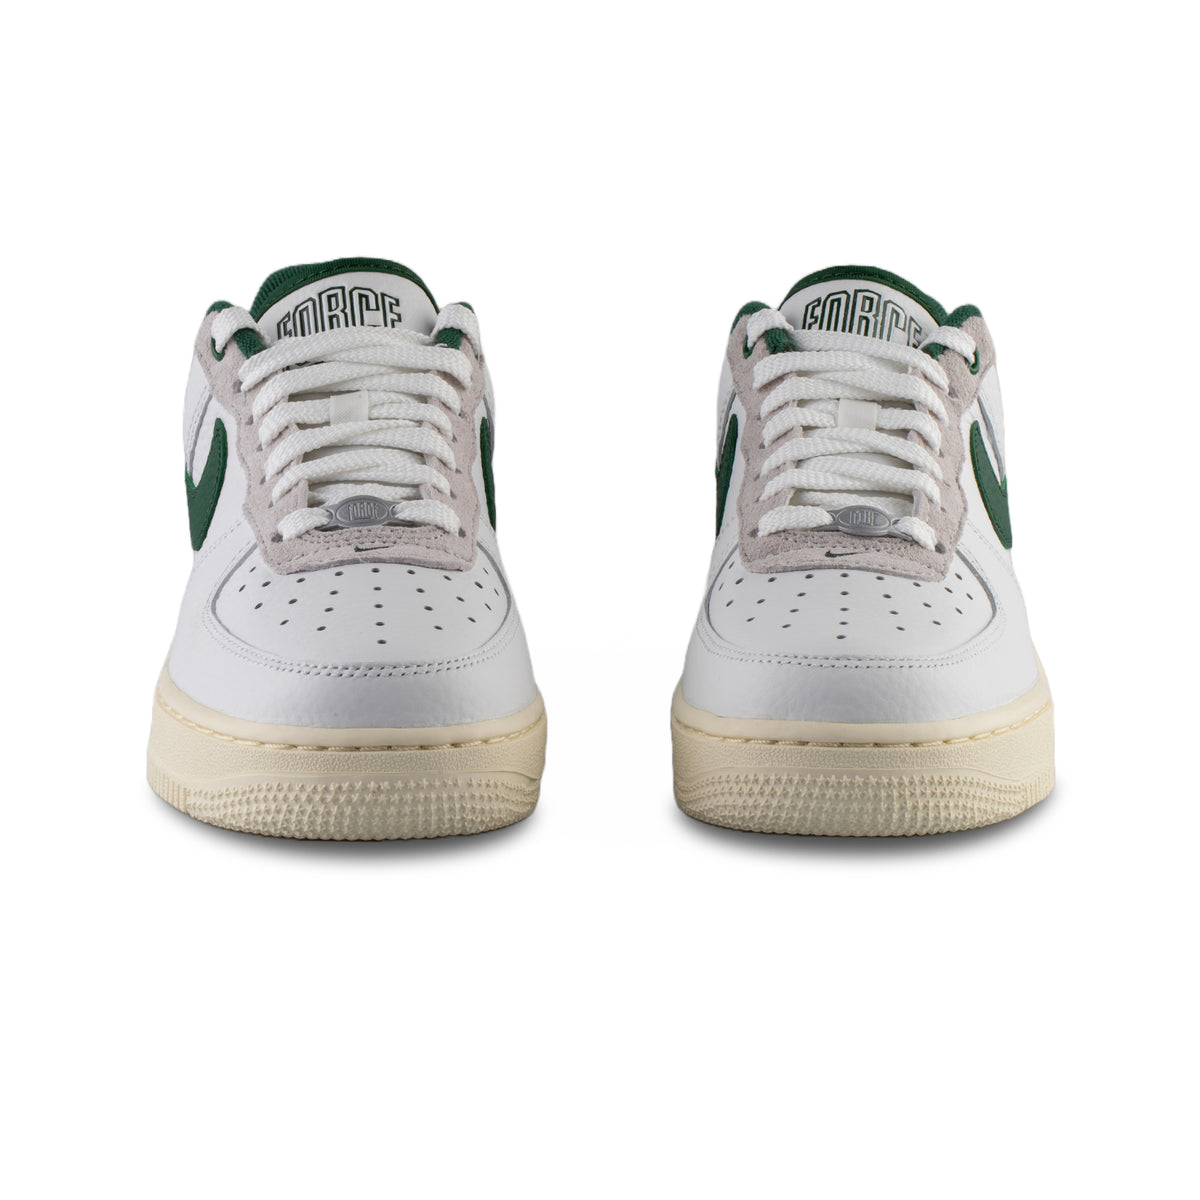 Nike WMNS Air Force 1 Low Command Force Summit White/Gorge Green ...